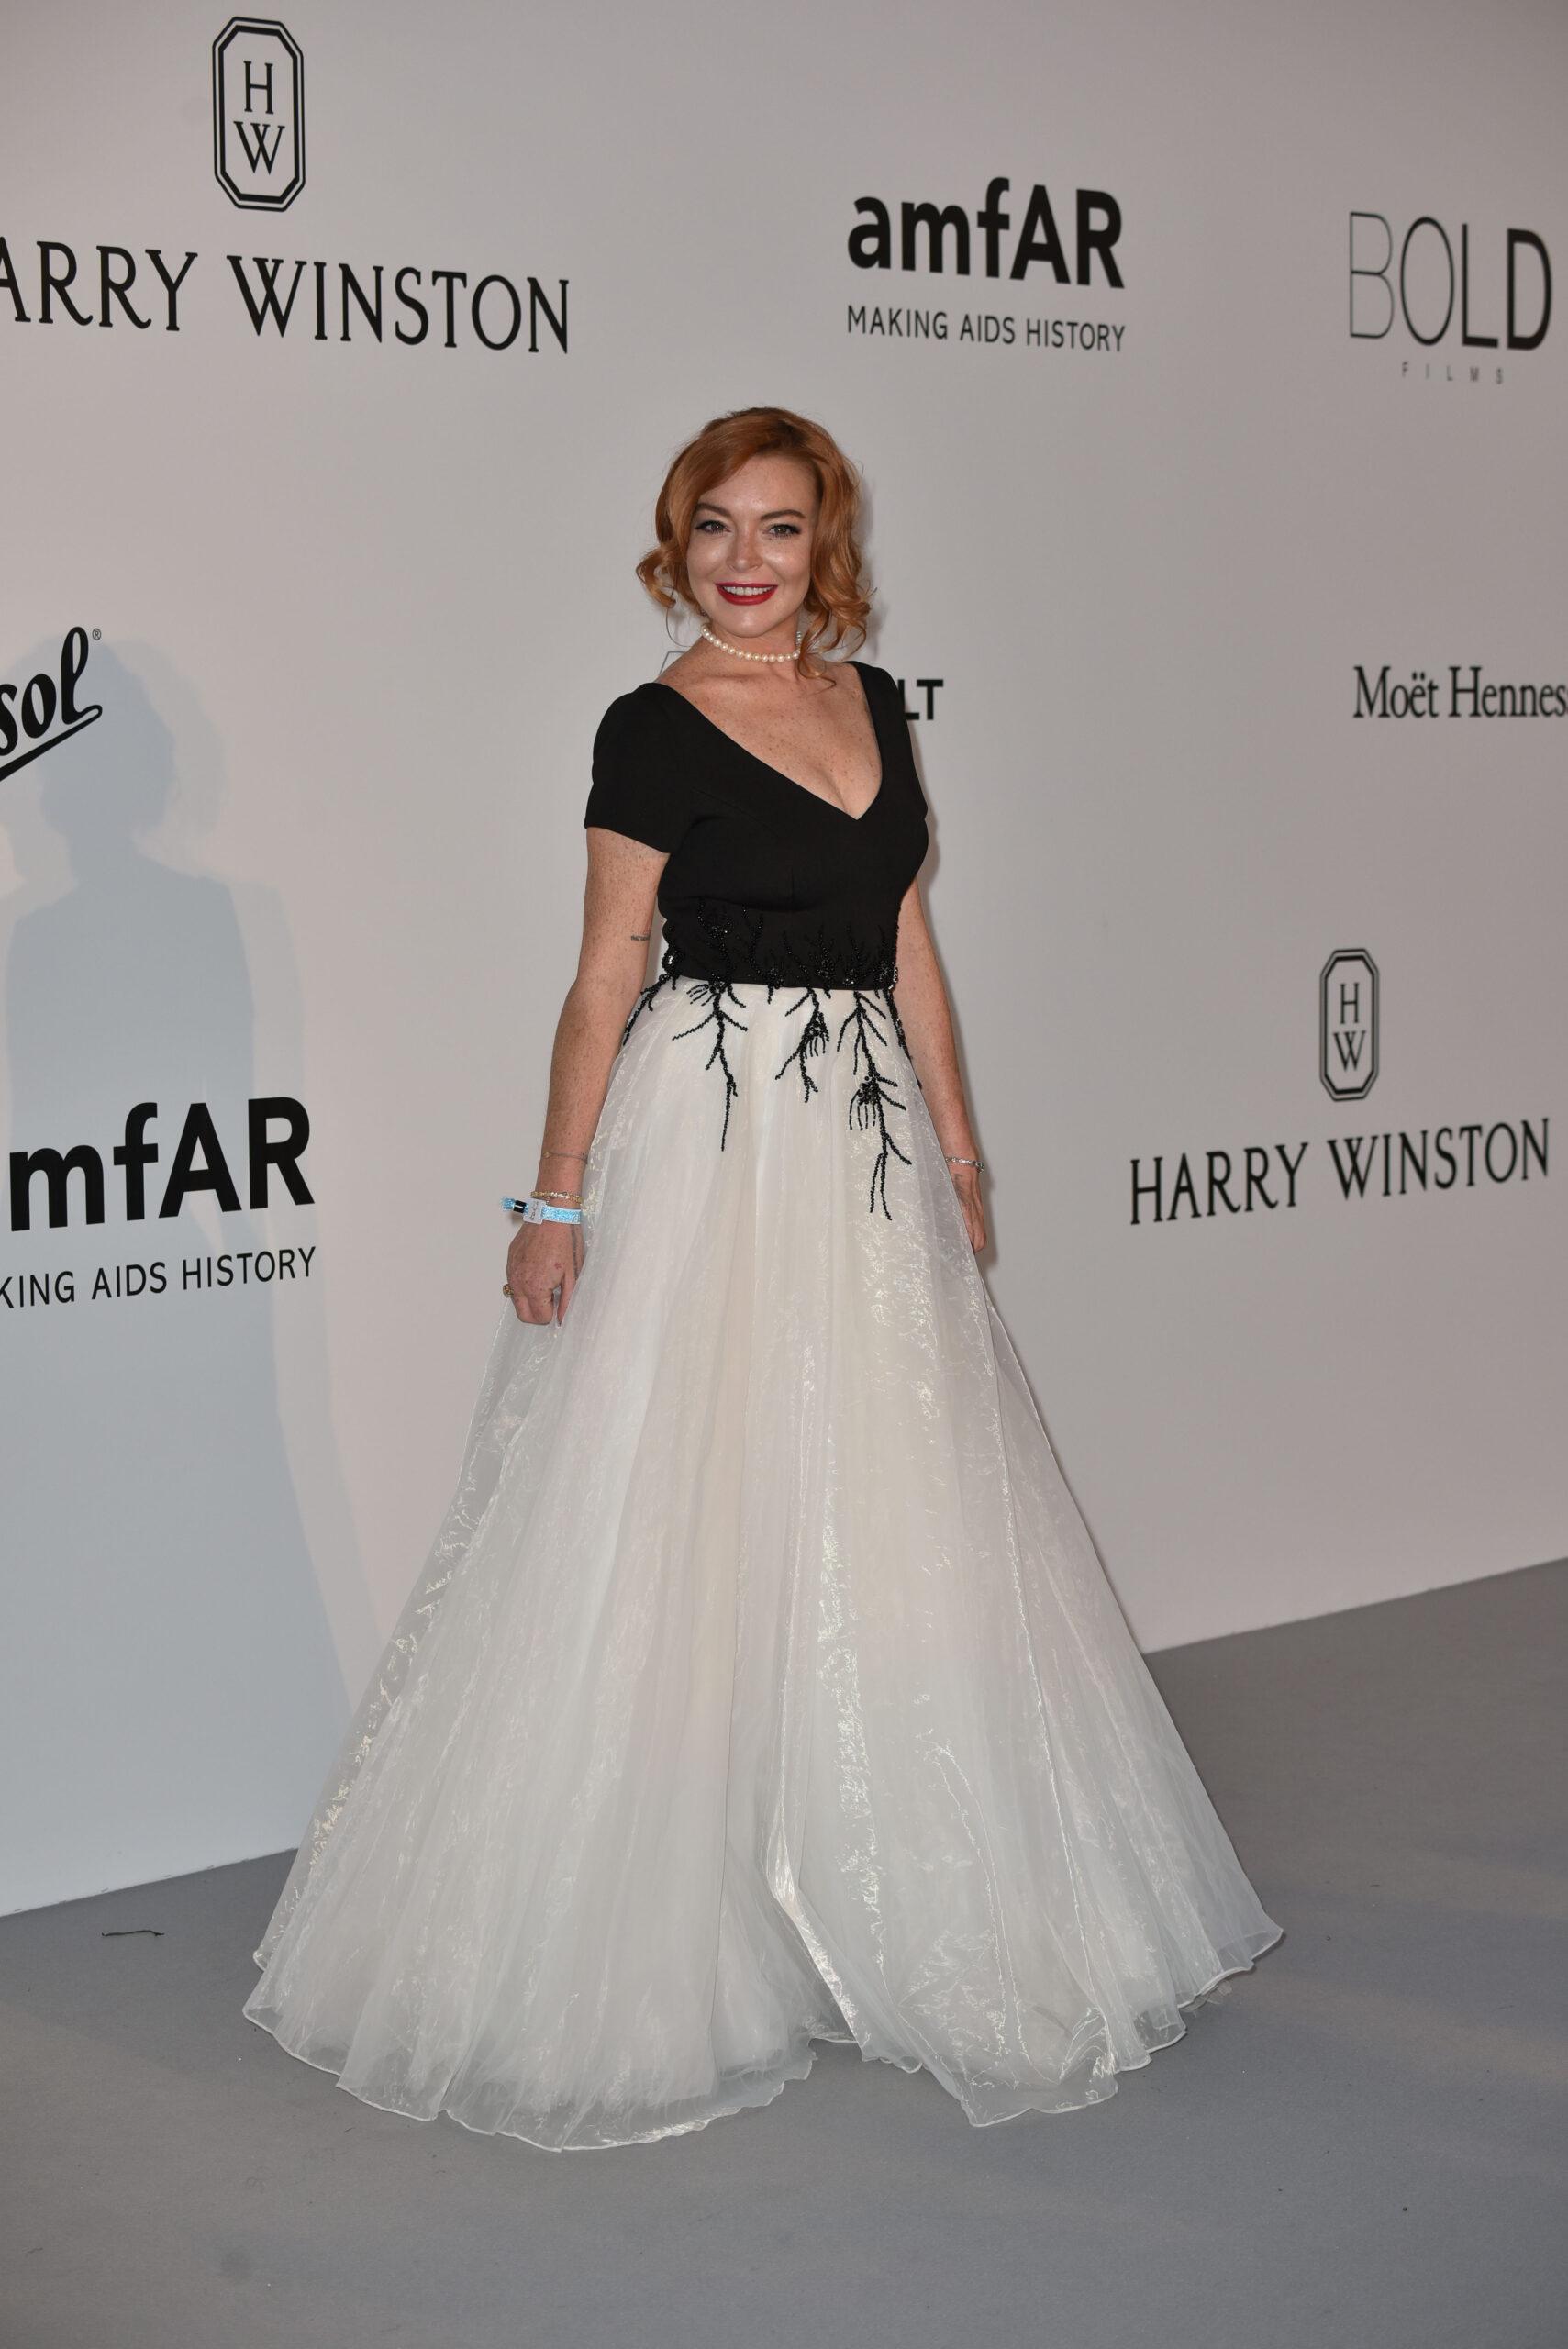 Lindsey Lohan attend the amfAR Gala in Cannes